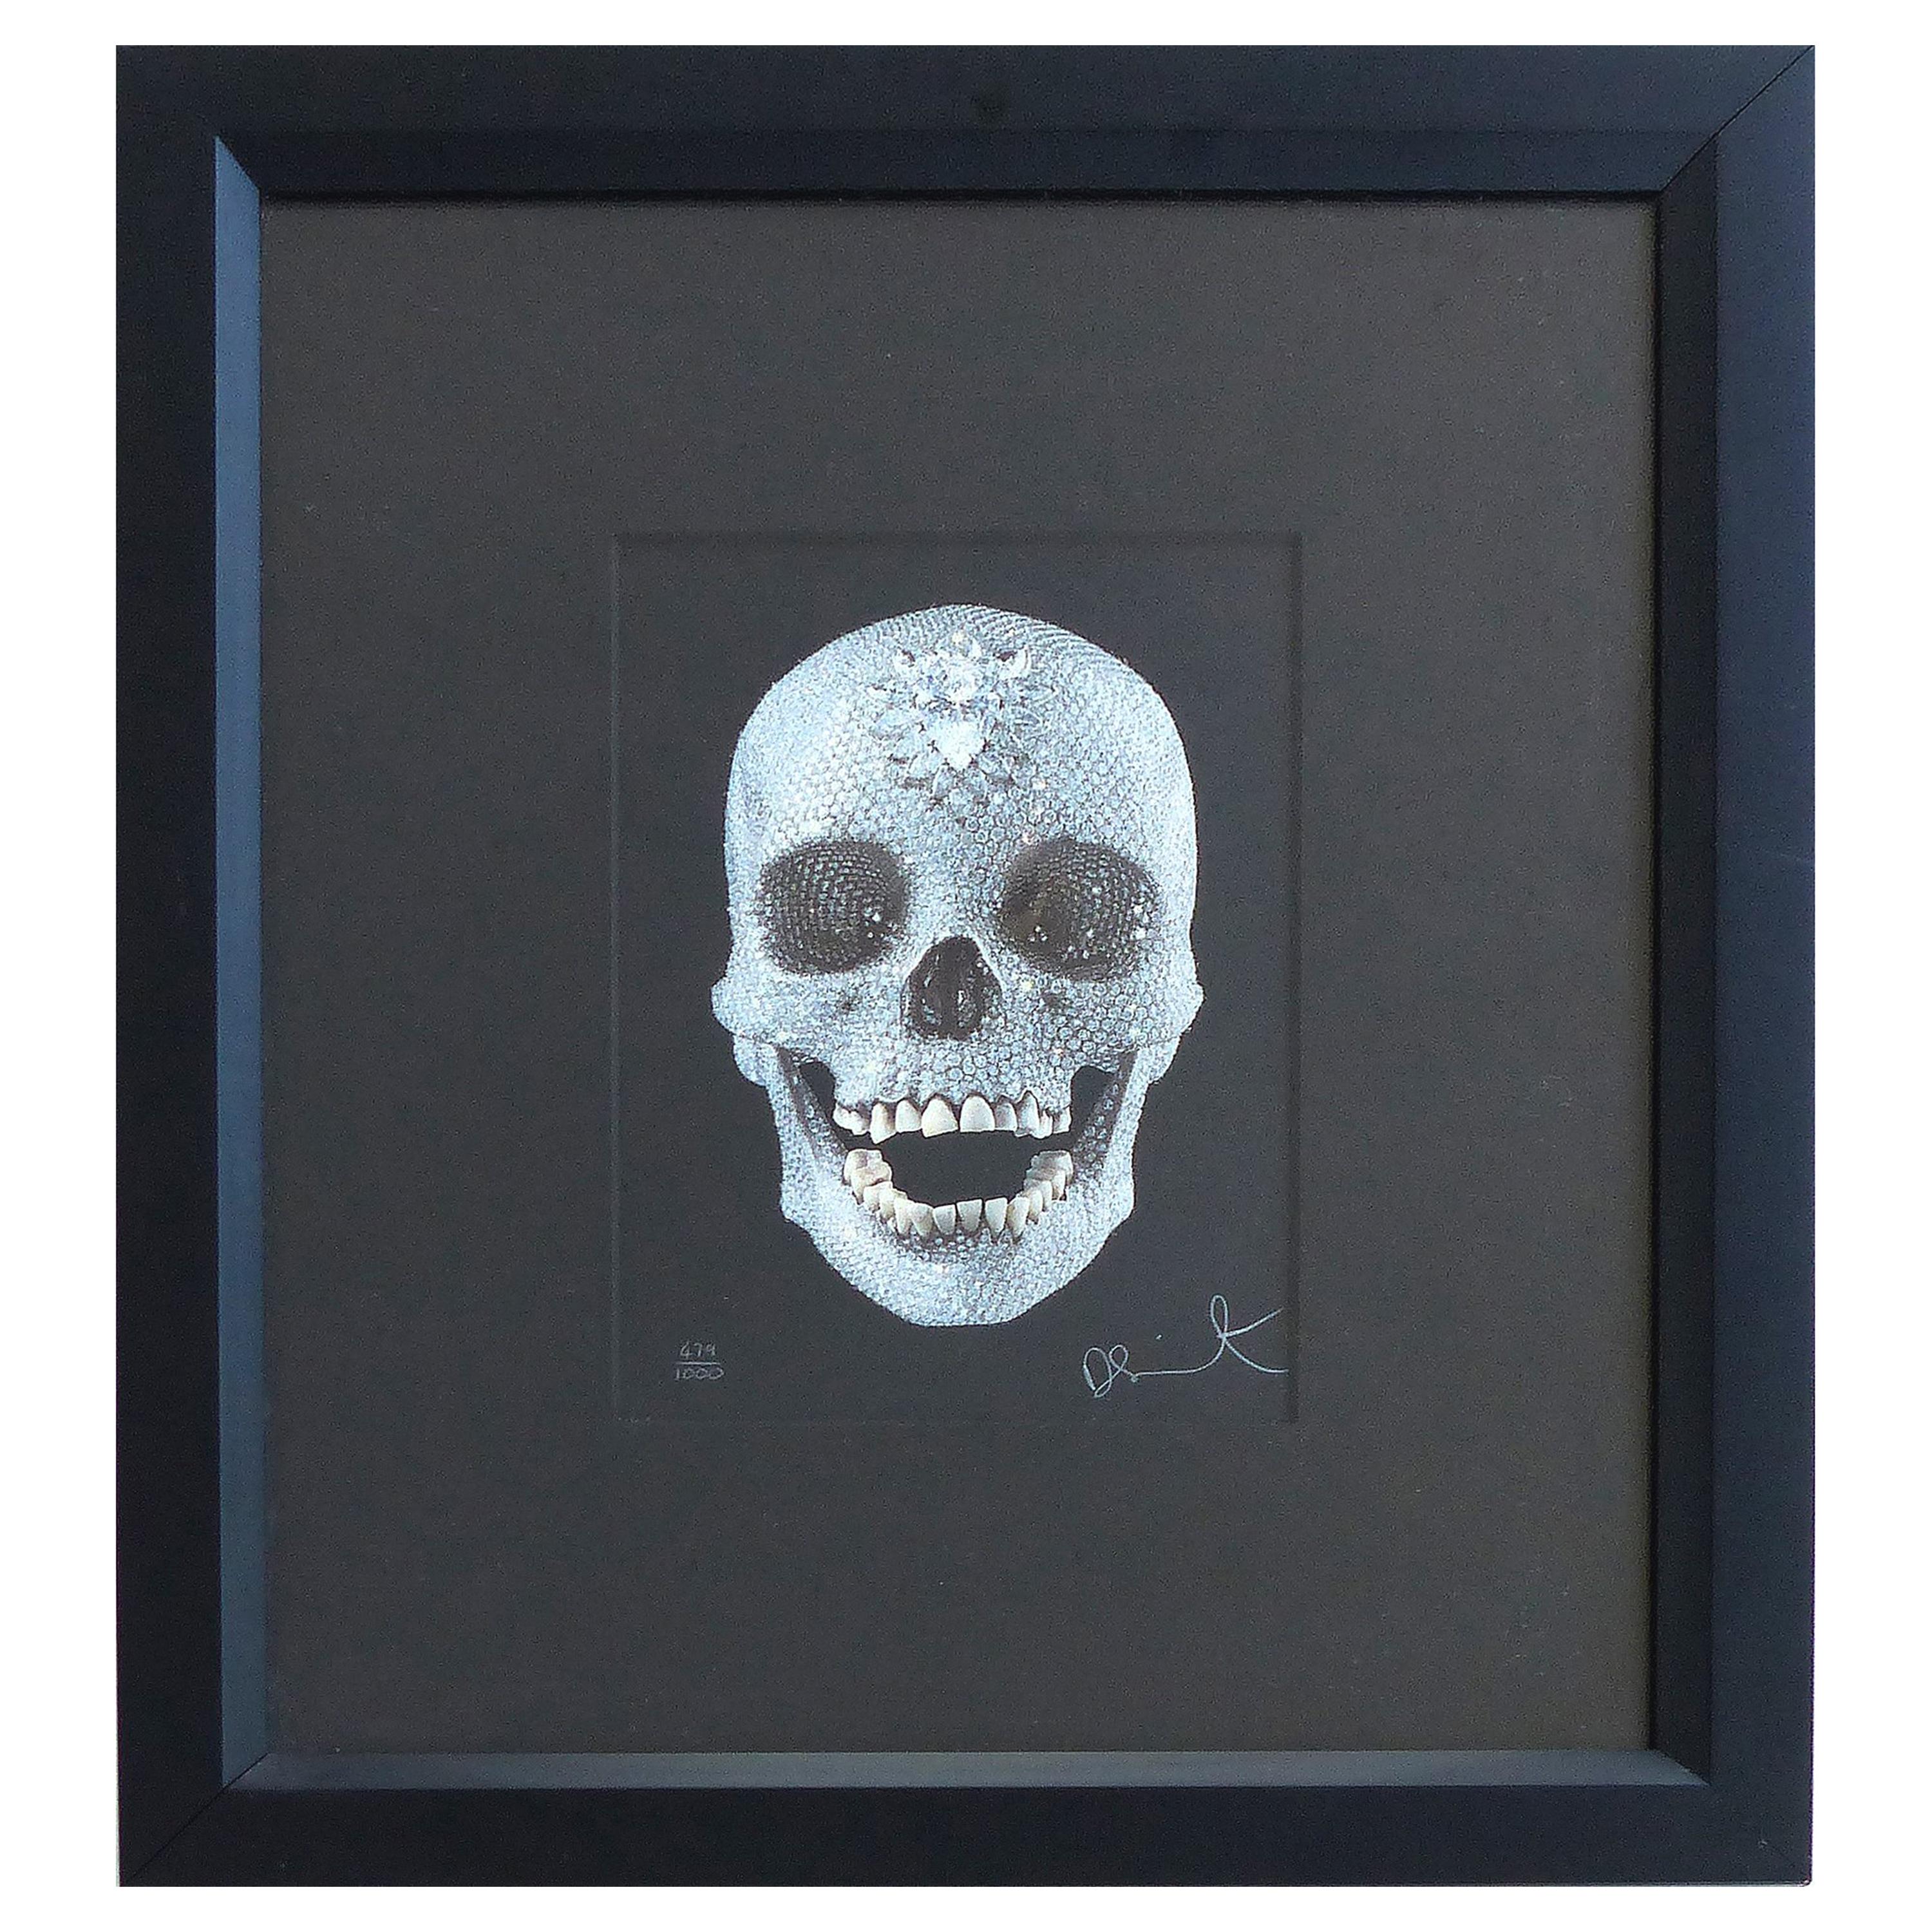  Damien Hirst "For the Love of God" Lithograph, Glazed & Diamond Dust, 479/1000 